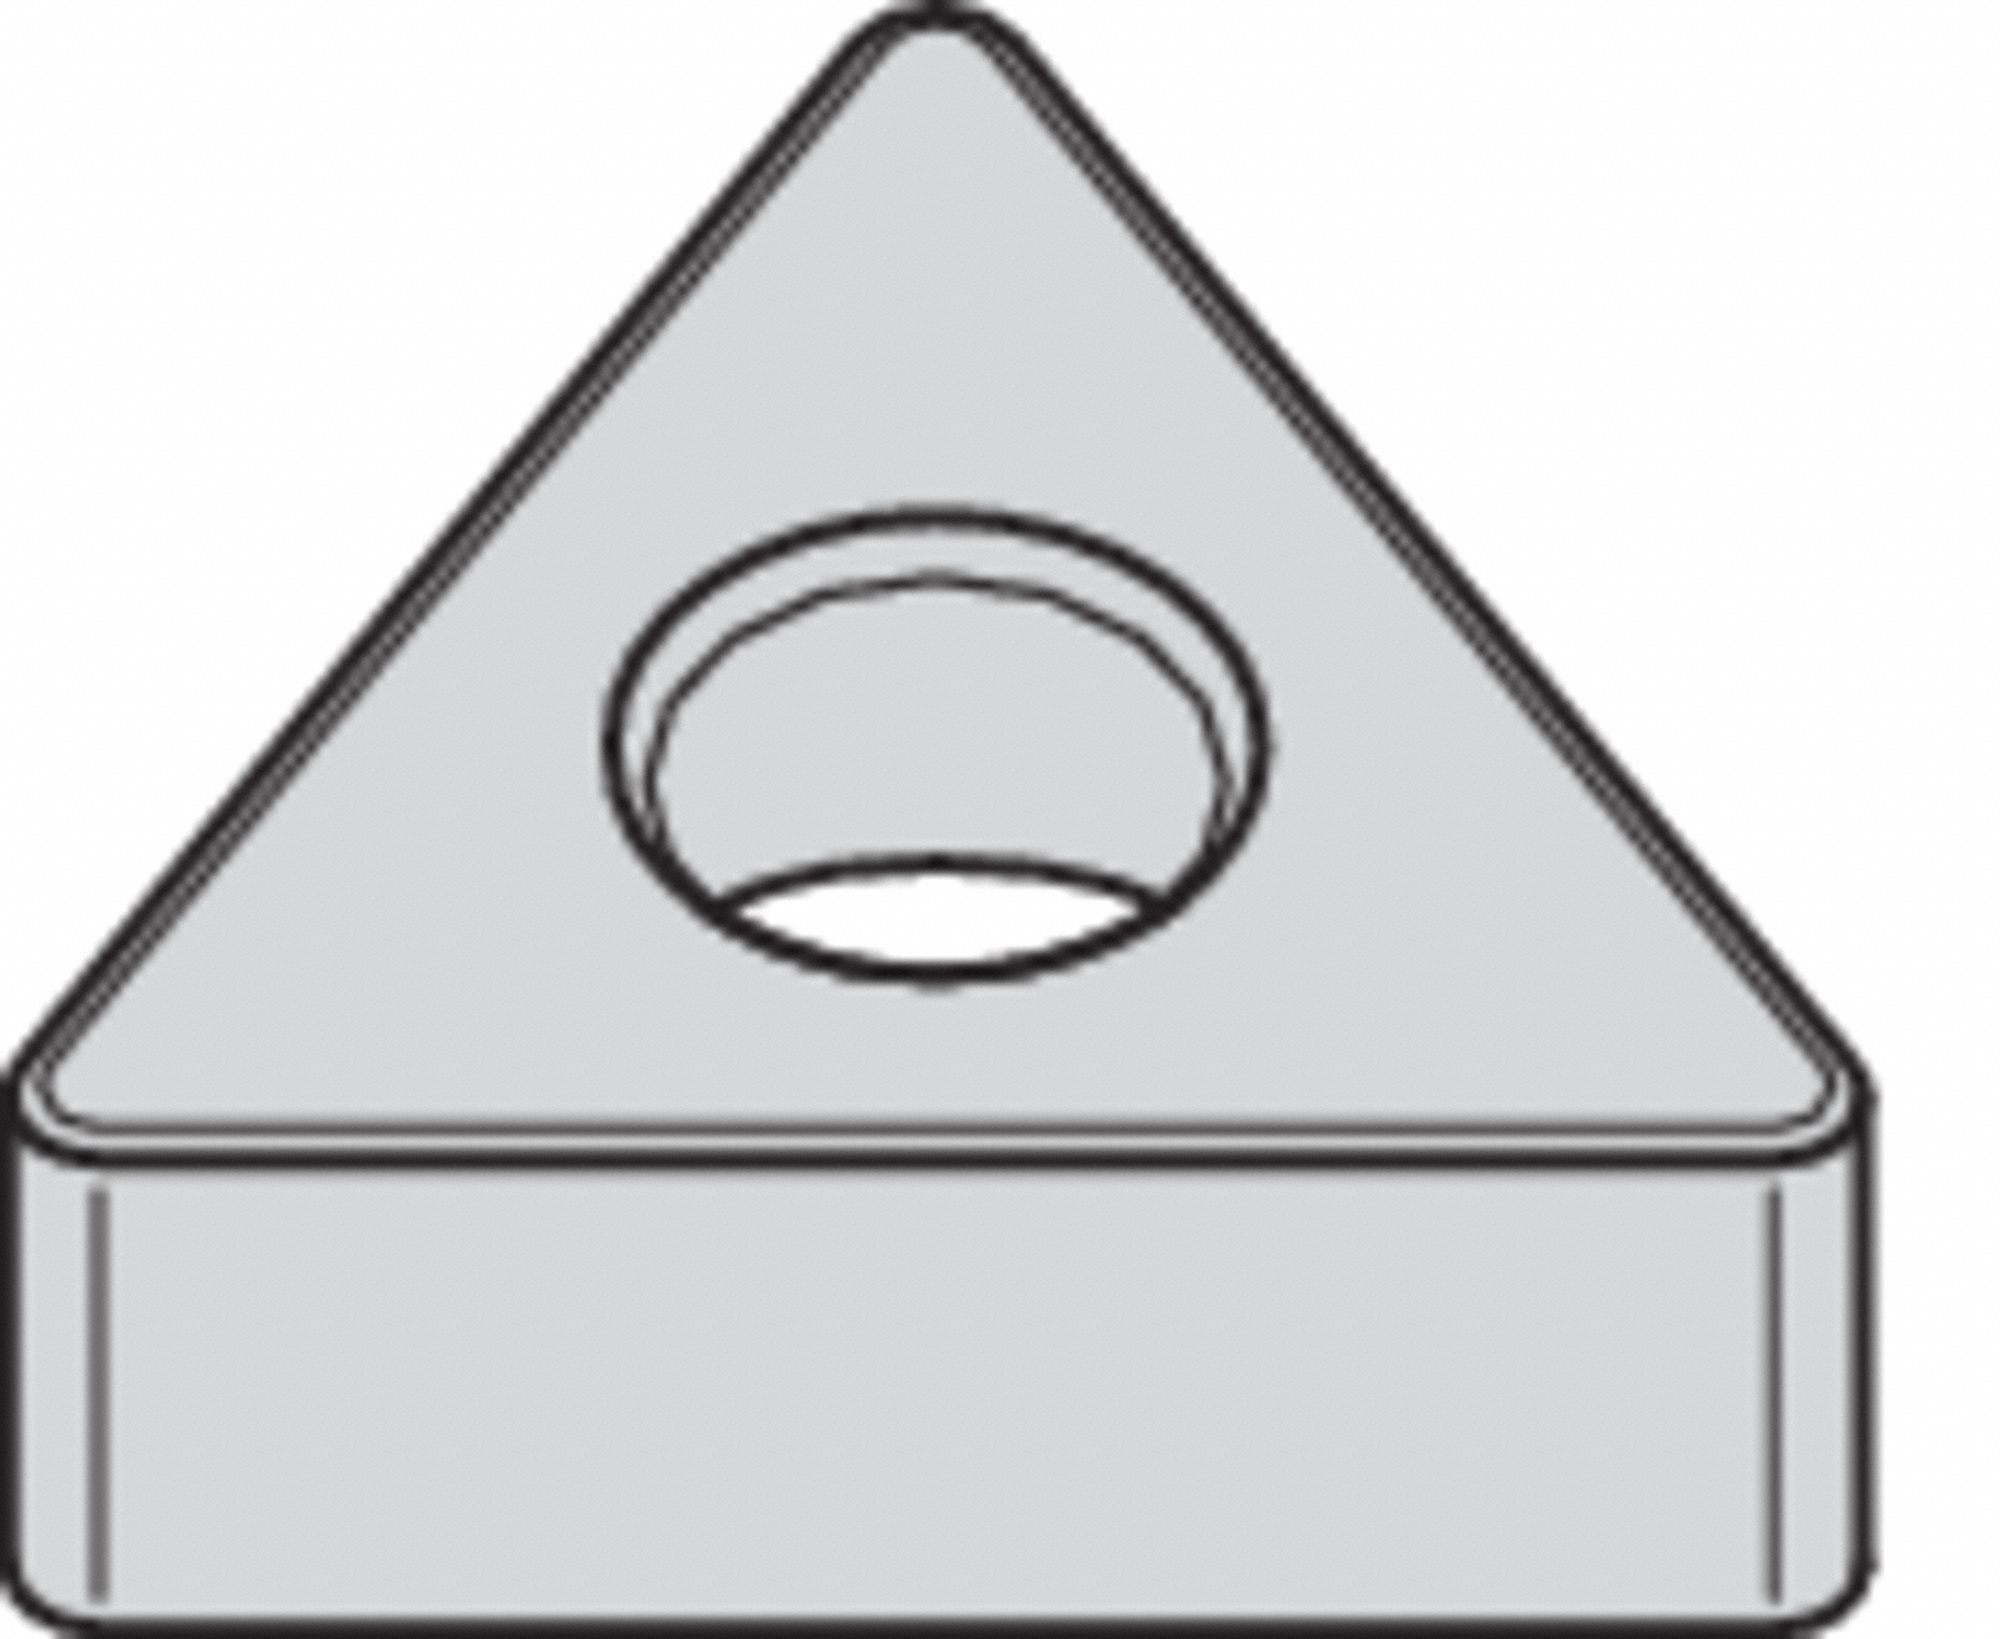 TRIANGLE TURNING INSERT, ⅜ IN INSCRIBED CIRCLE, ALUMINA, NEUTRAL, 0 °  CLEARANCE, CW2015